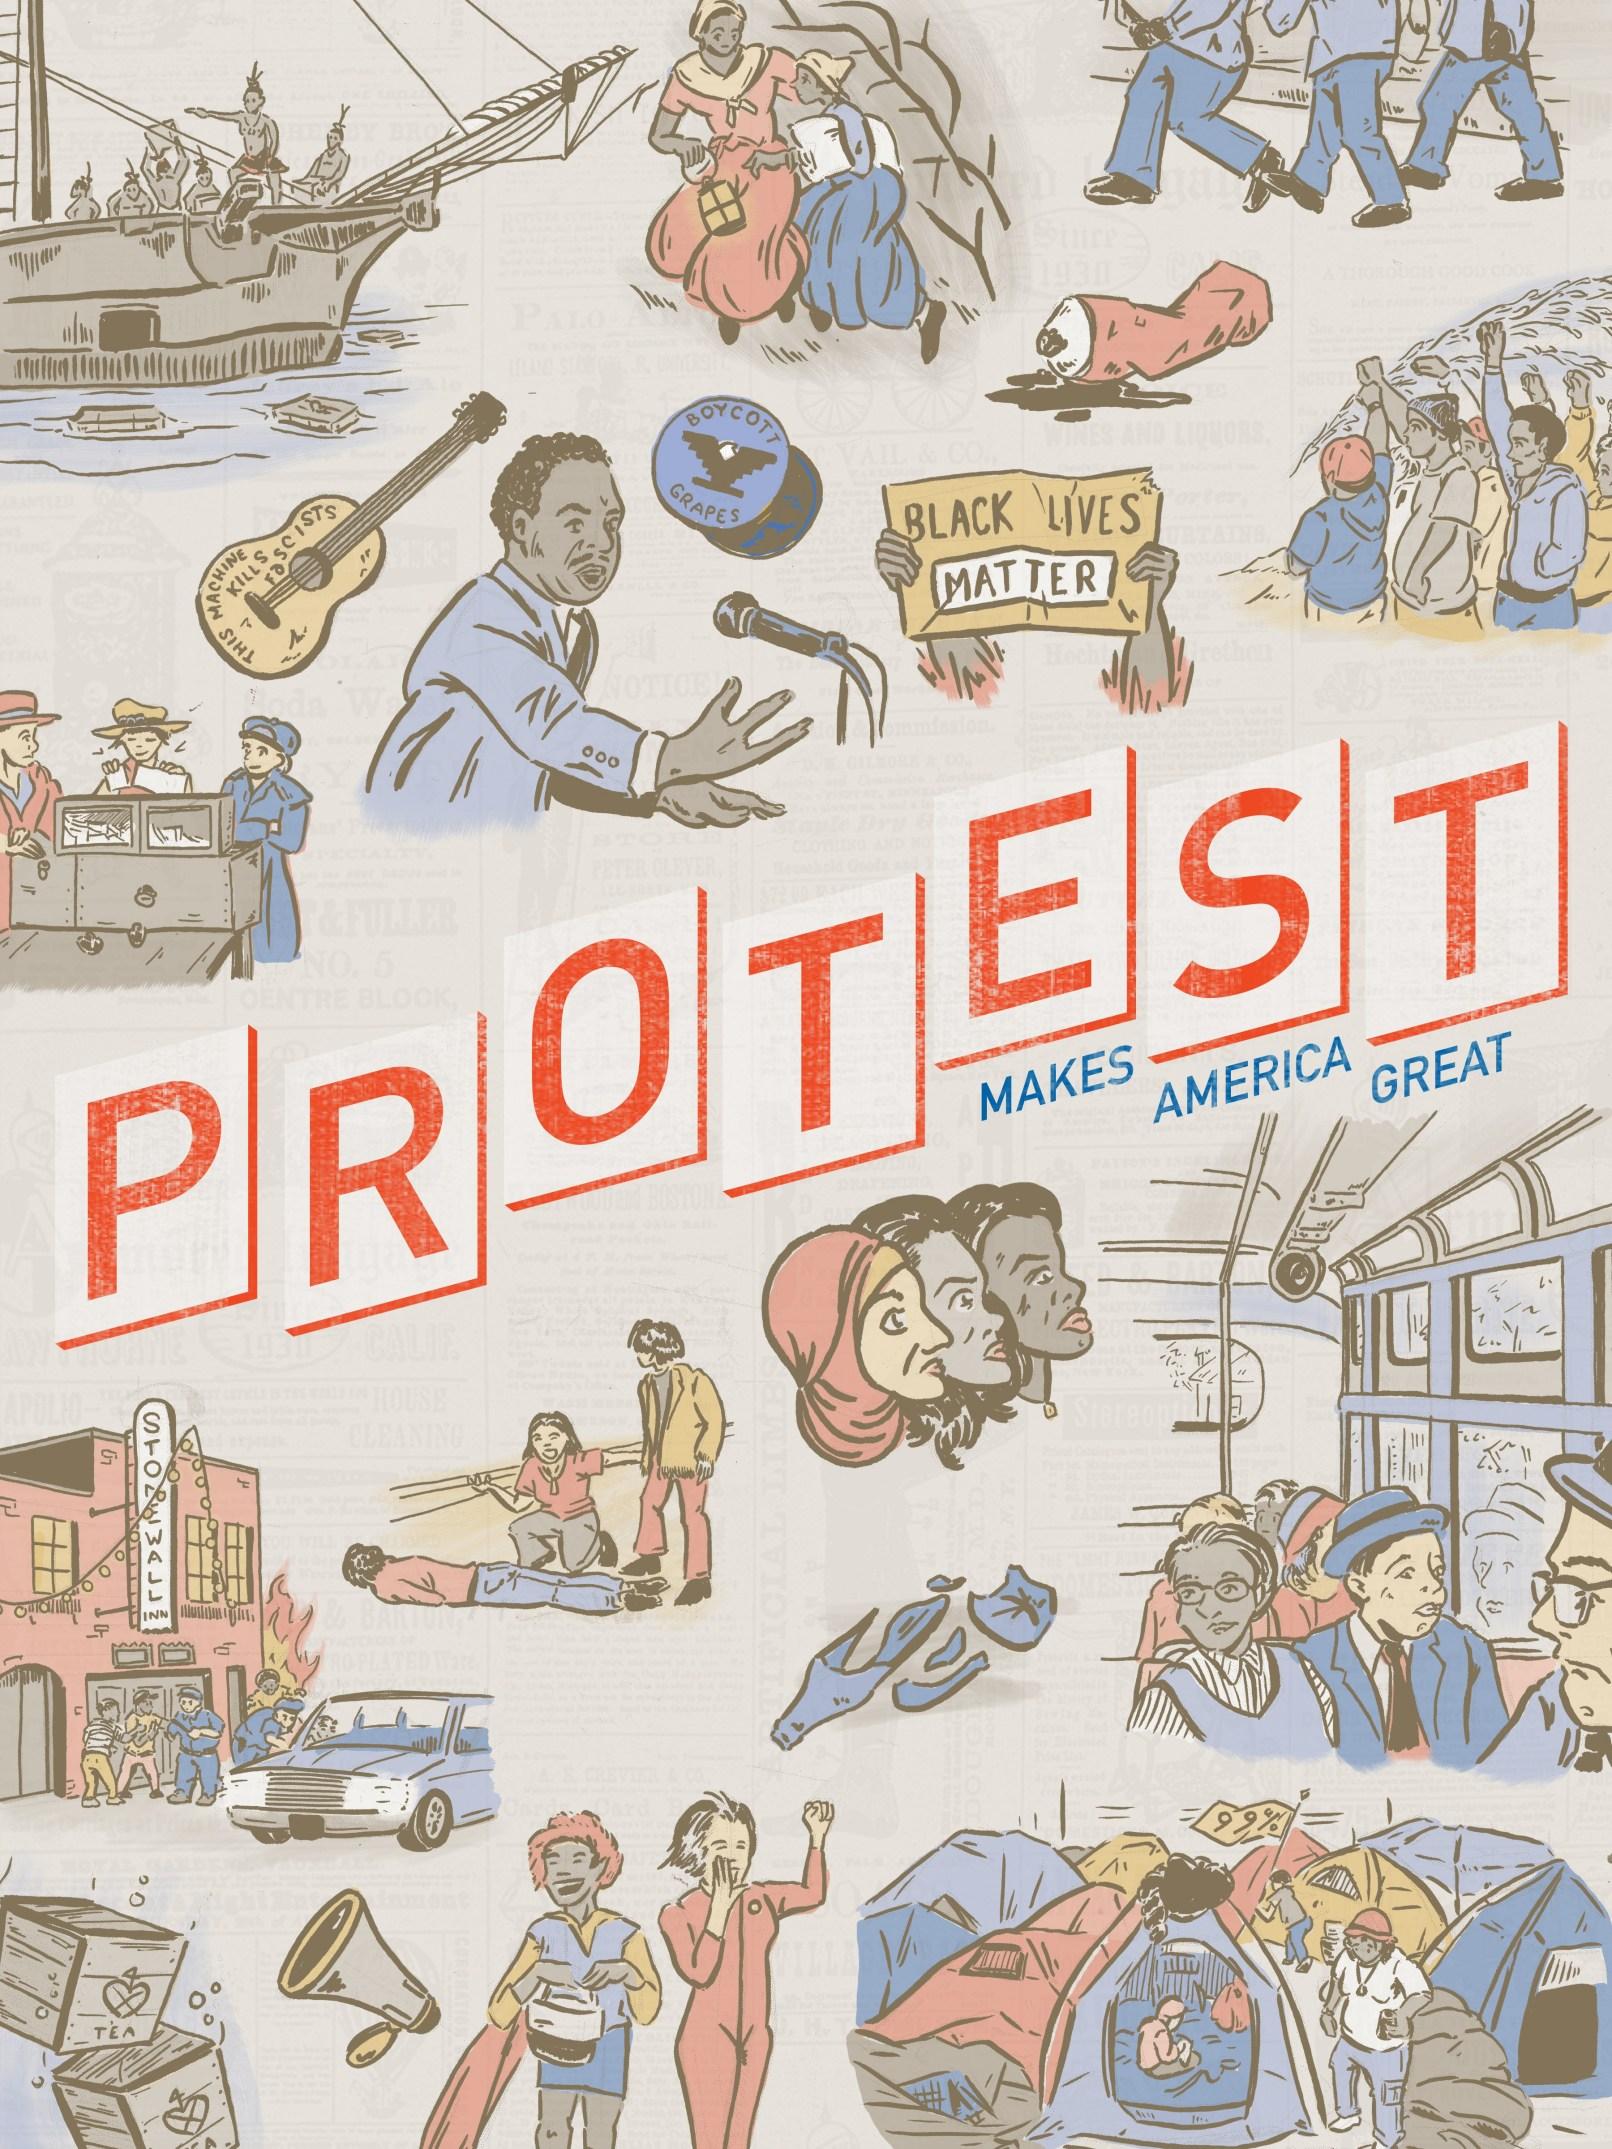 Cover art for PE Winter 2018, showing the words "Protest makes America great," and several important moments of protest of American history.